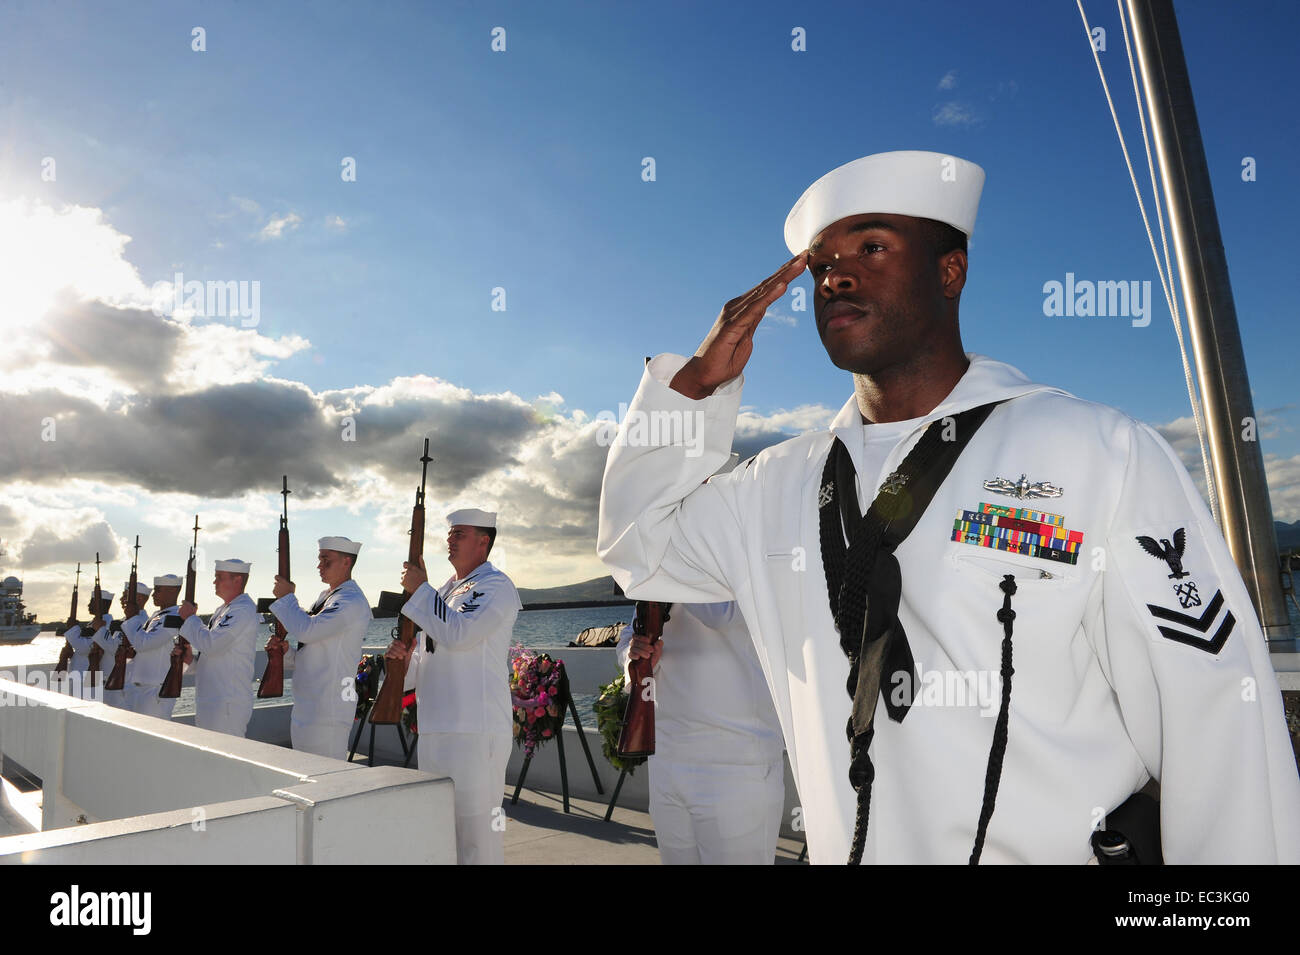 US Navy sailors salute during an ash scattering ceremony at the 73rd Anniversary commemoration at the Pearl Harbor memorial December 7, 2014 in Pearl Harbor, Hawaii. Pearl Harbor was attacked by Japanese forces on December 7, 1941. Stock Photo